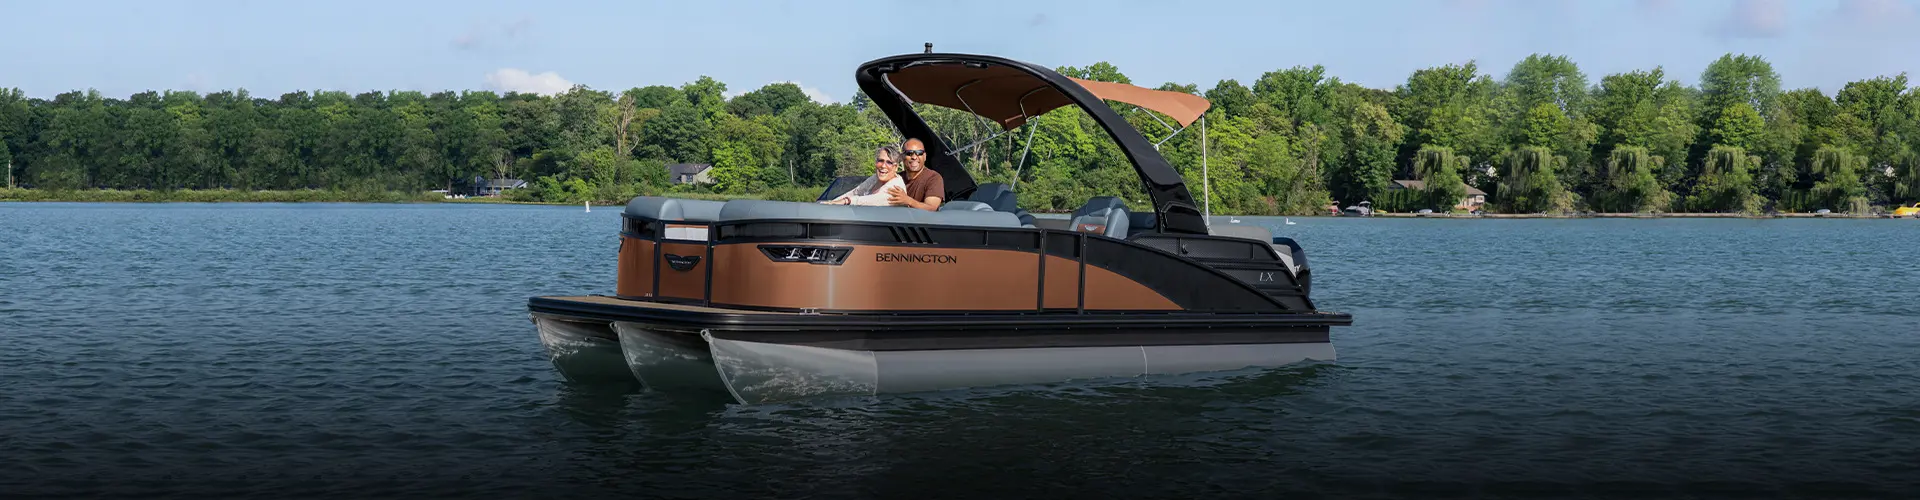 Defining Excellence in Pontoon Boats